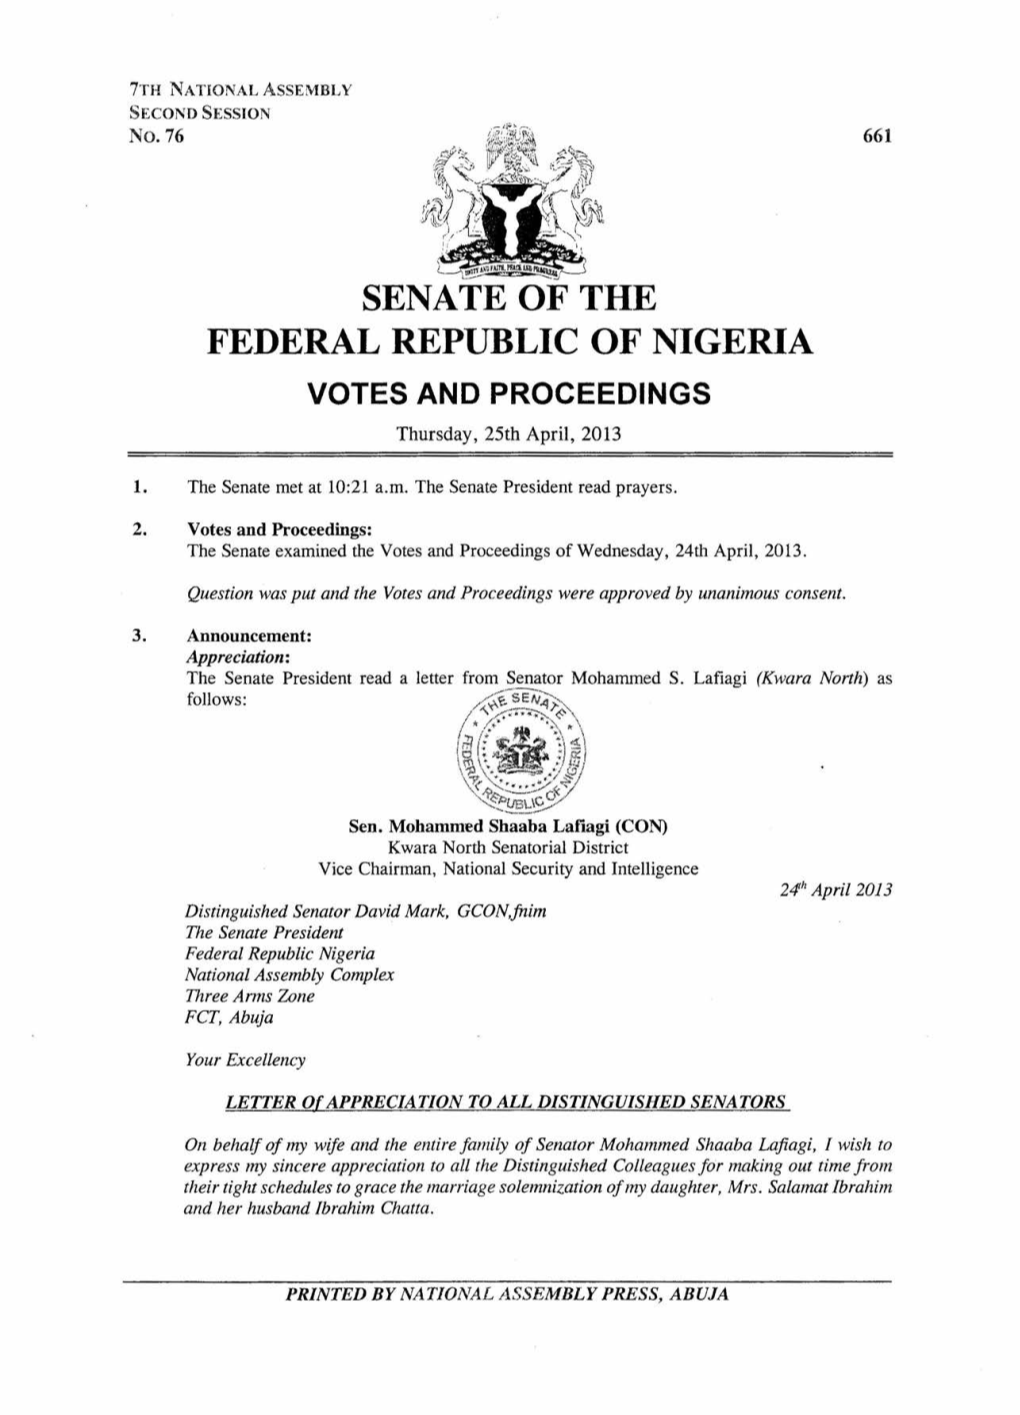 SENATE of the FEDERAL REPUBLIC of NIGERIA VOTES and PROCEEDINGS Thursday, 25Th April, 2013